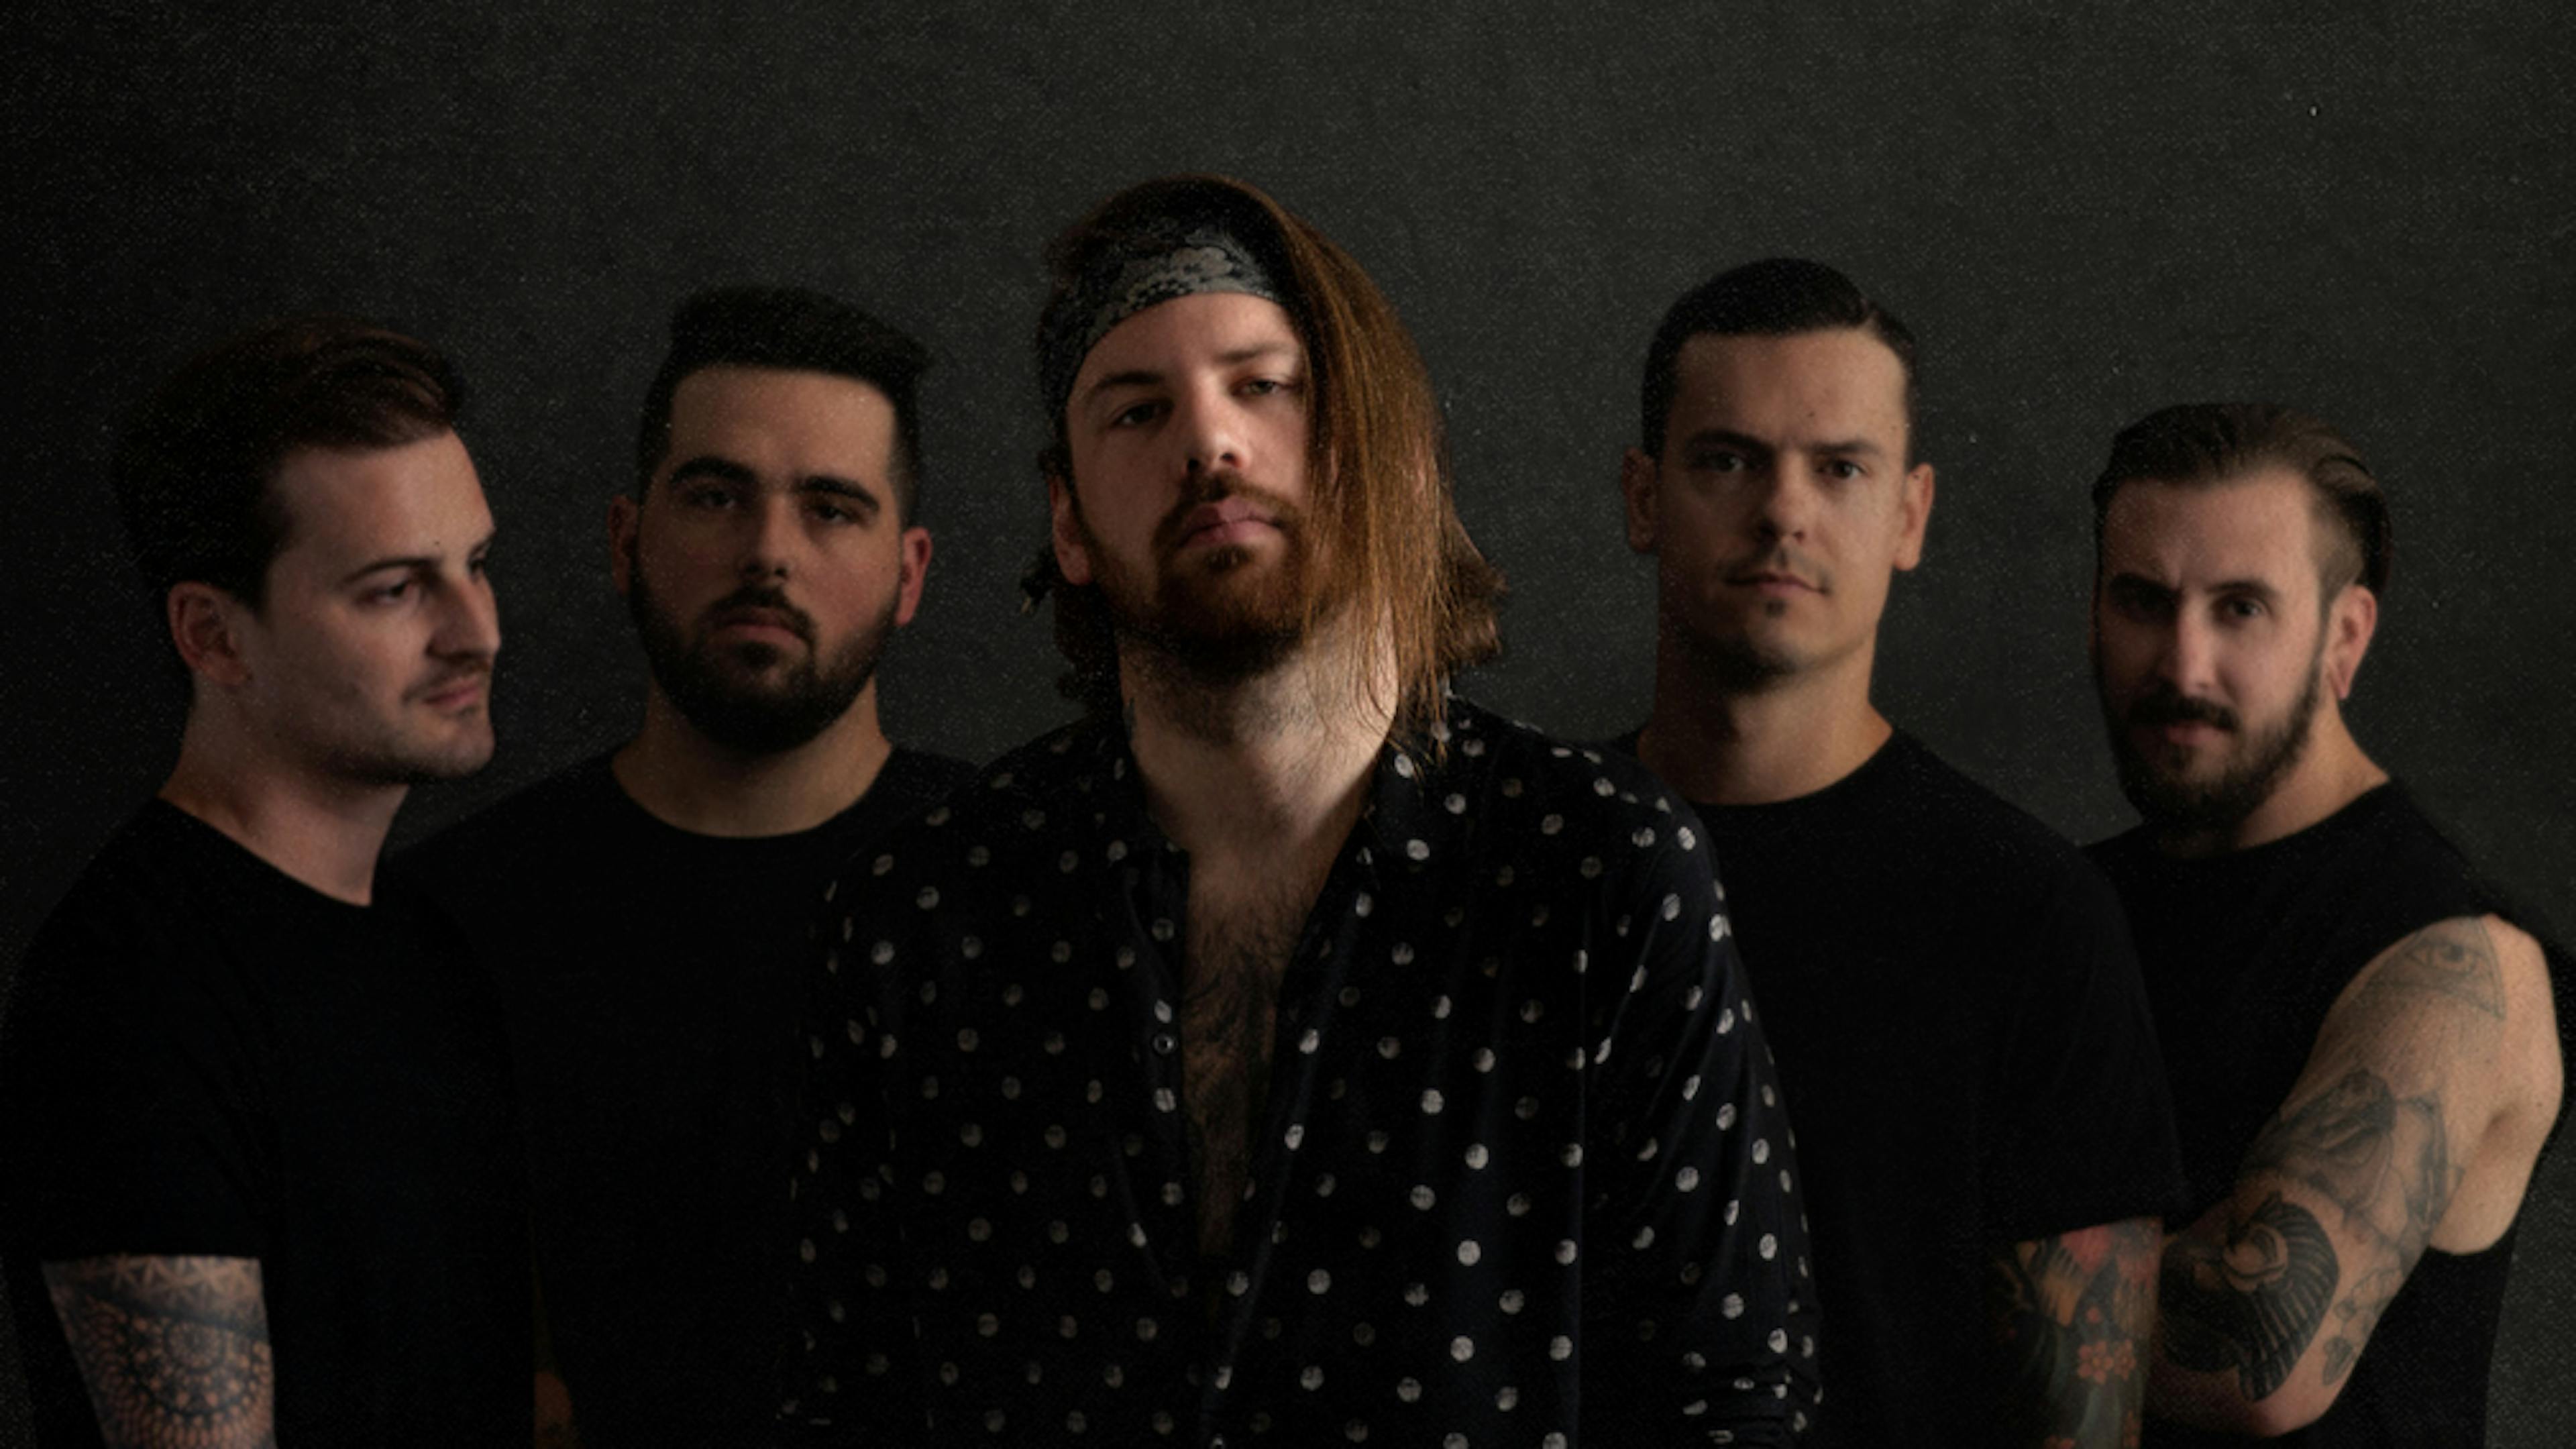 Check Out Beartooth's Cover Of Wild Thing